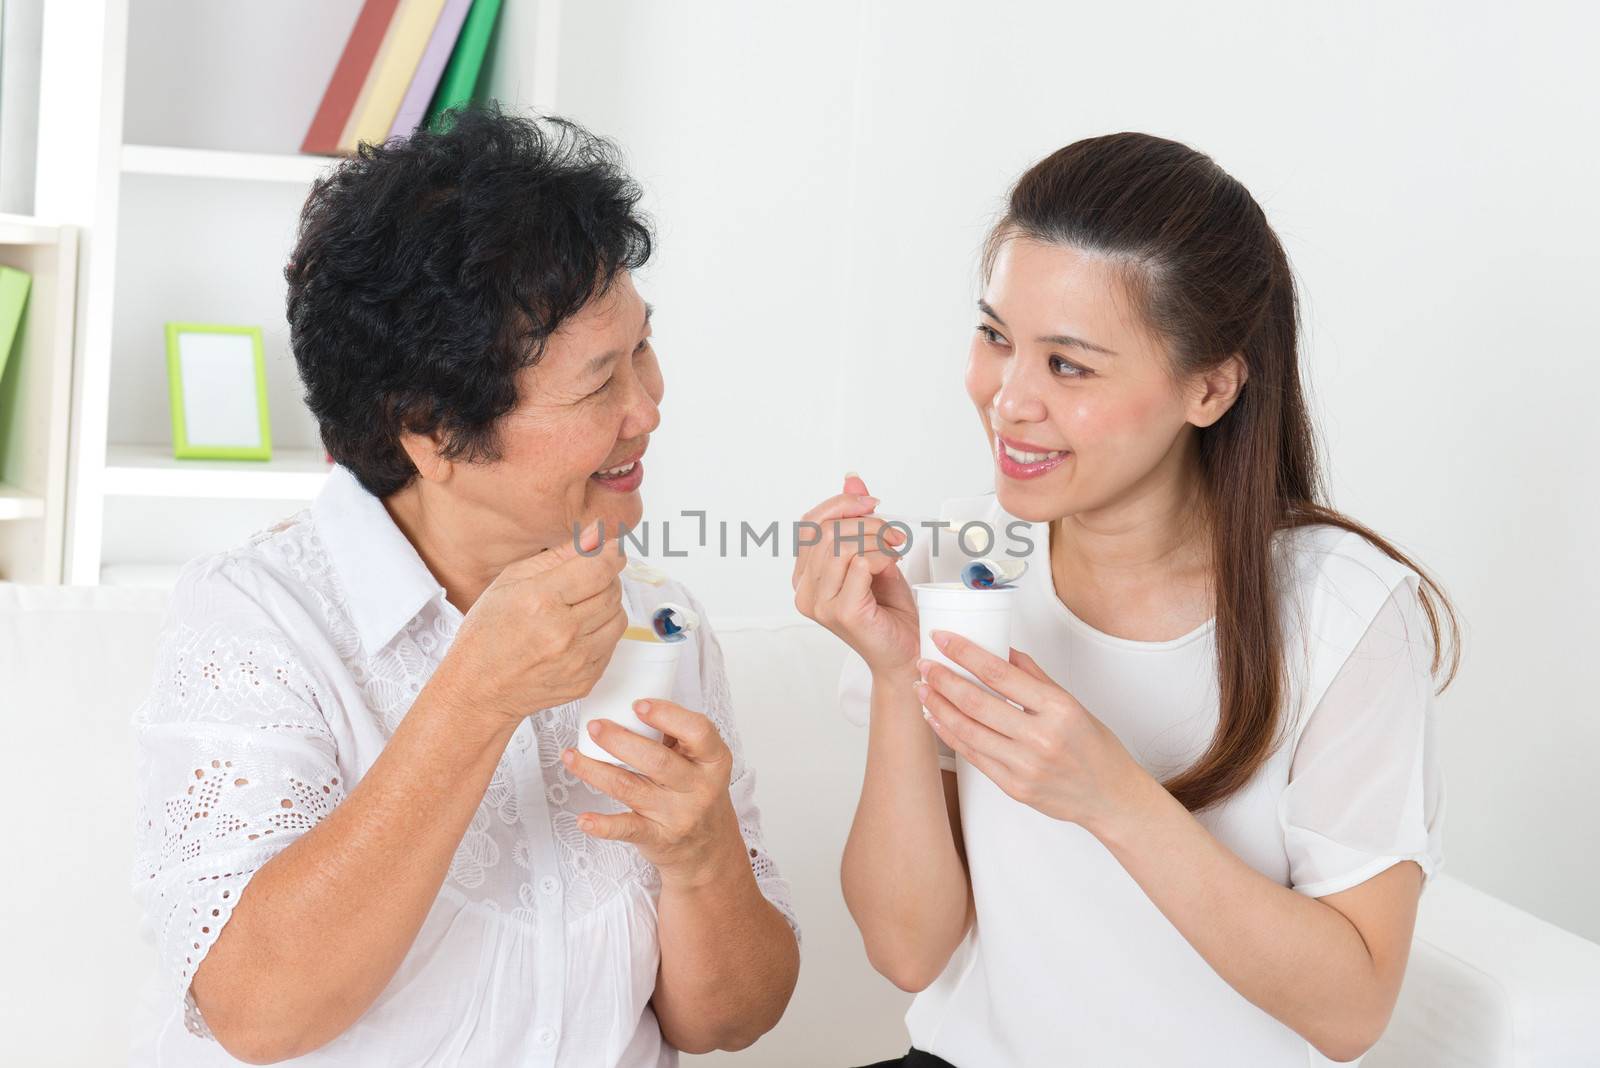 Eating yoghurt . Happy Asian family eating yogurt at home. Beautiful senior mother and adult daughter, healthcare concept.